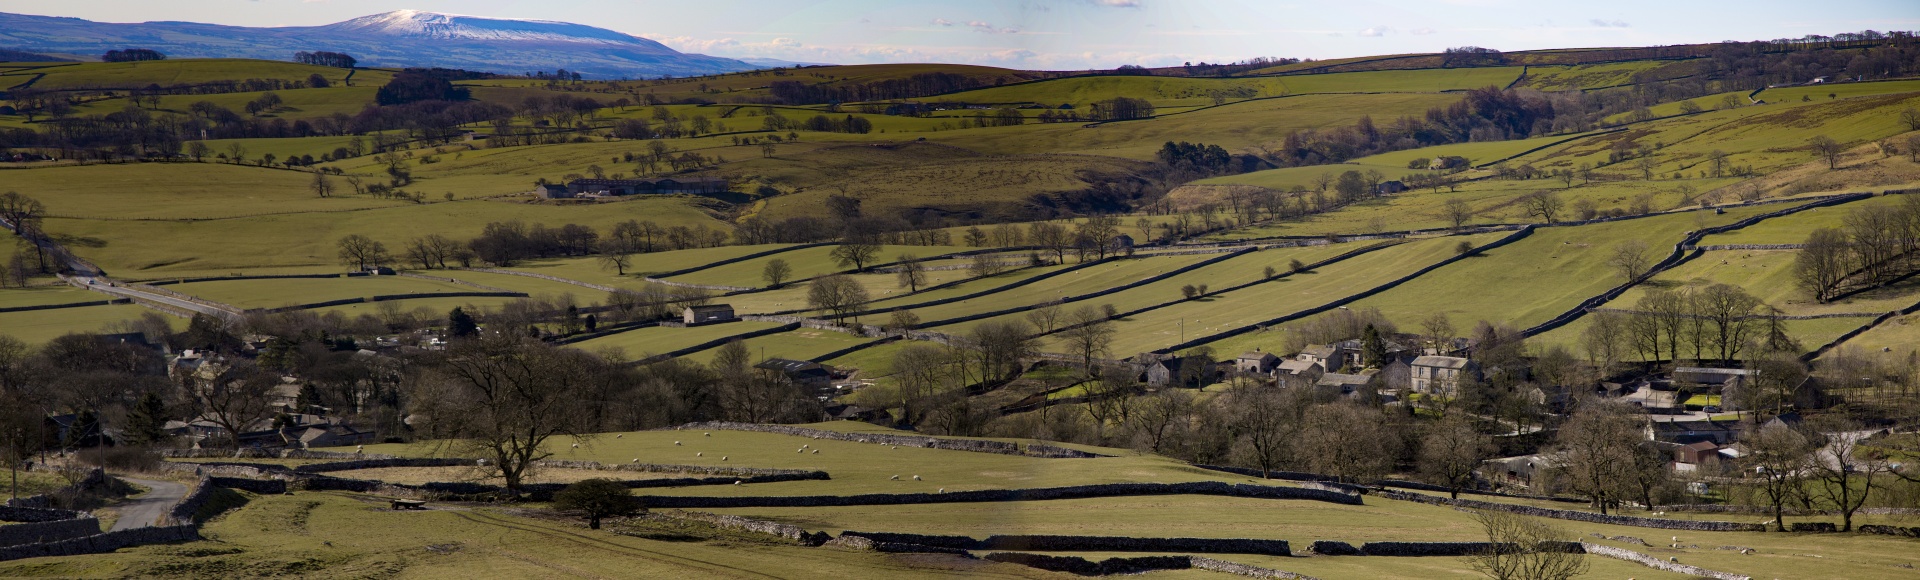 cove dales fields free photo